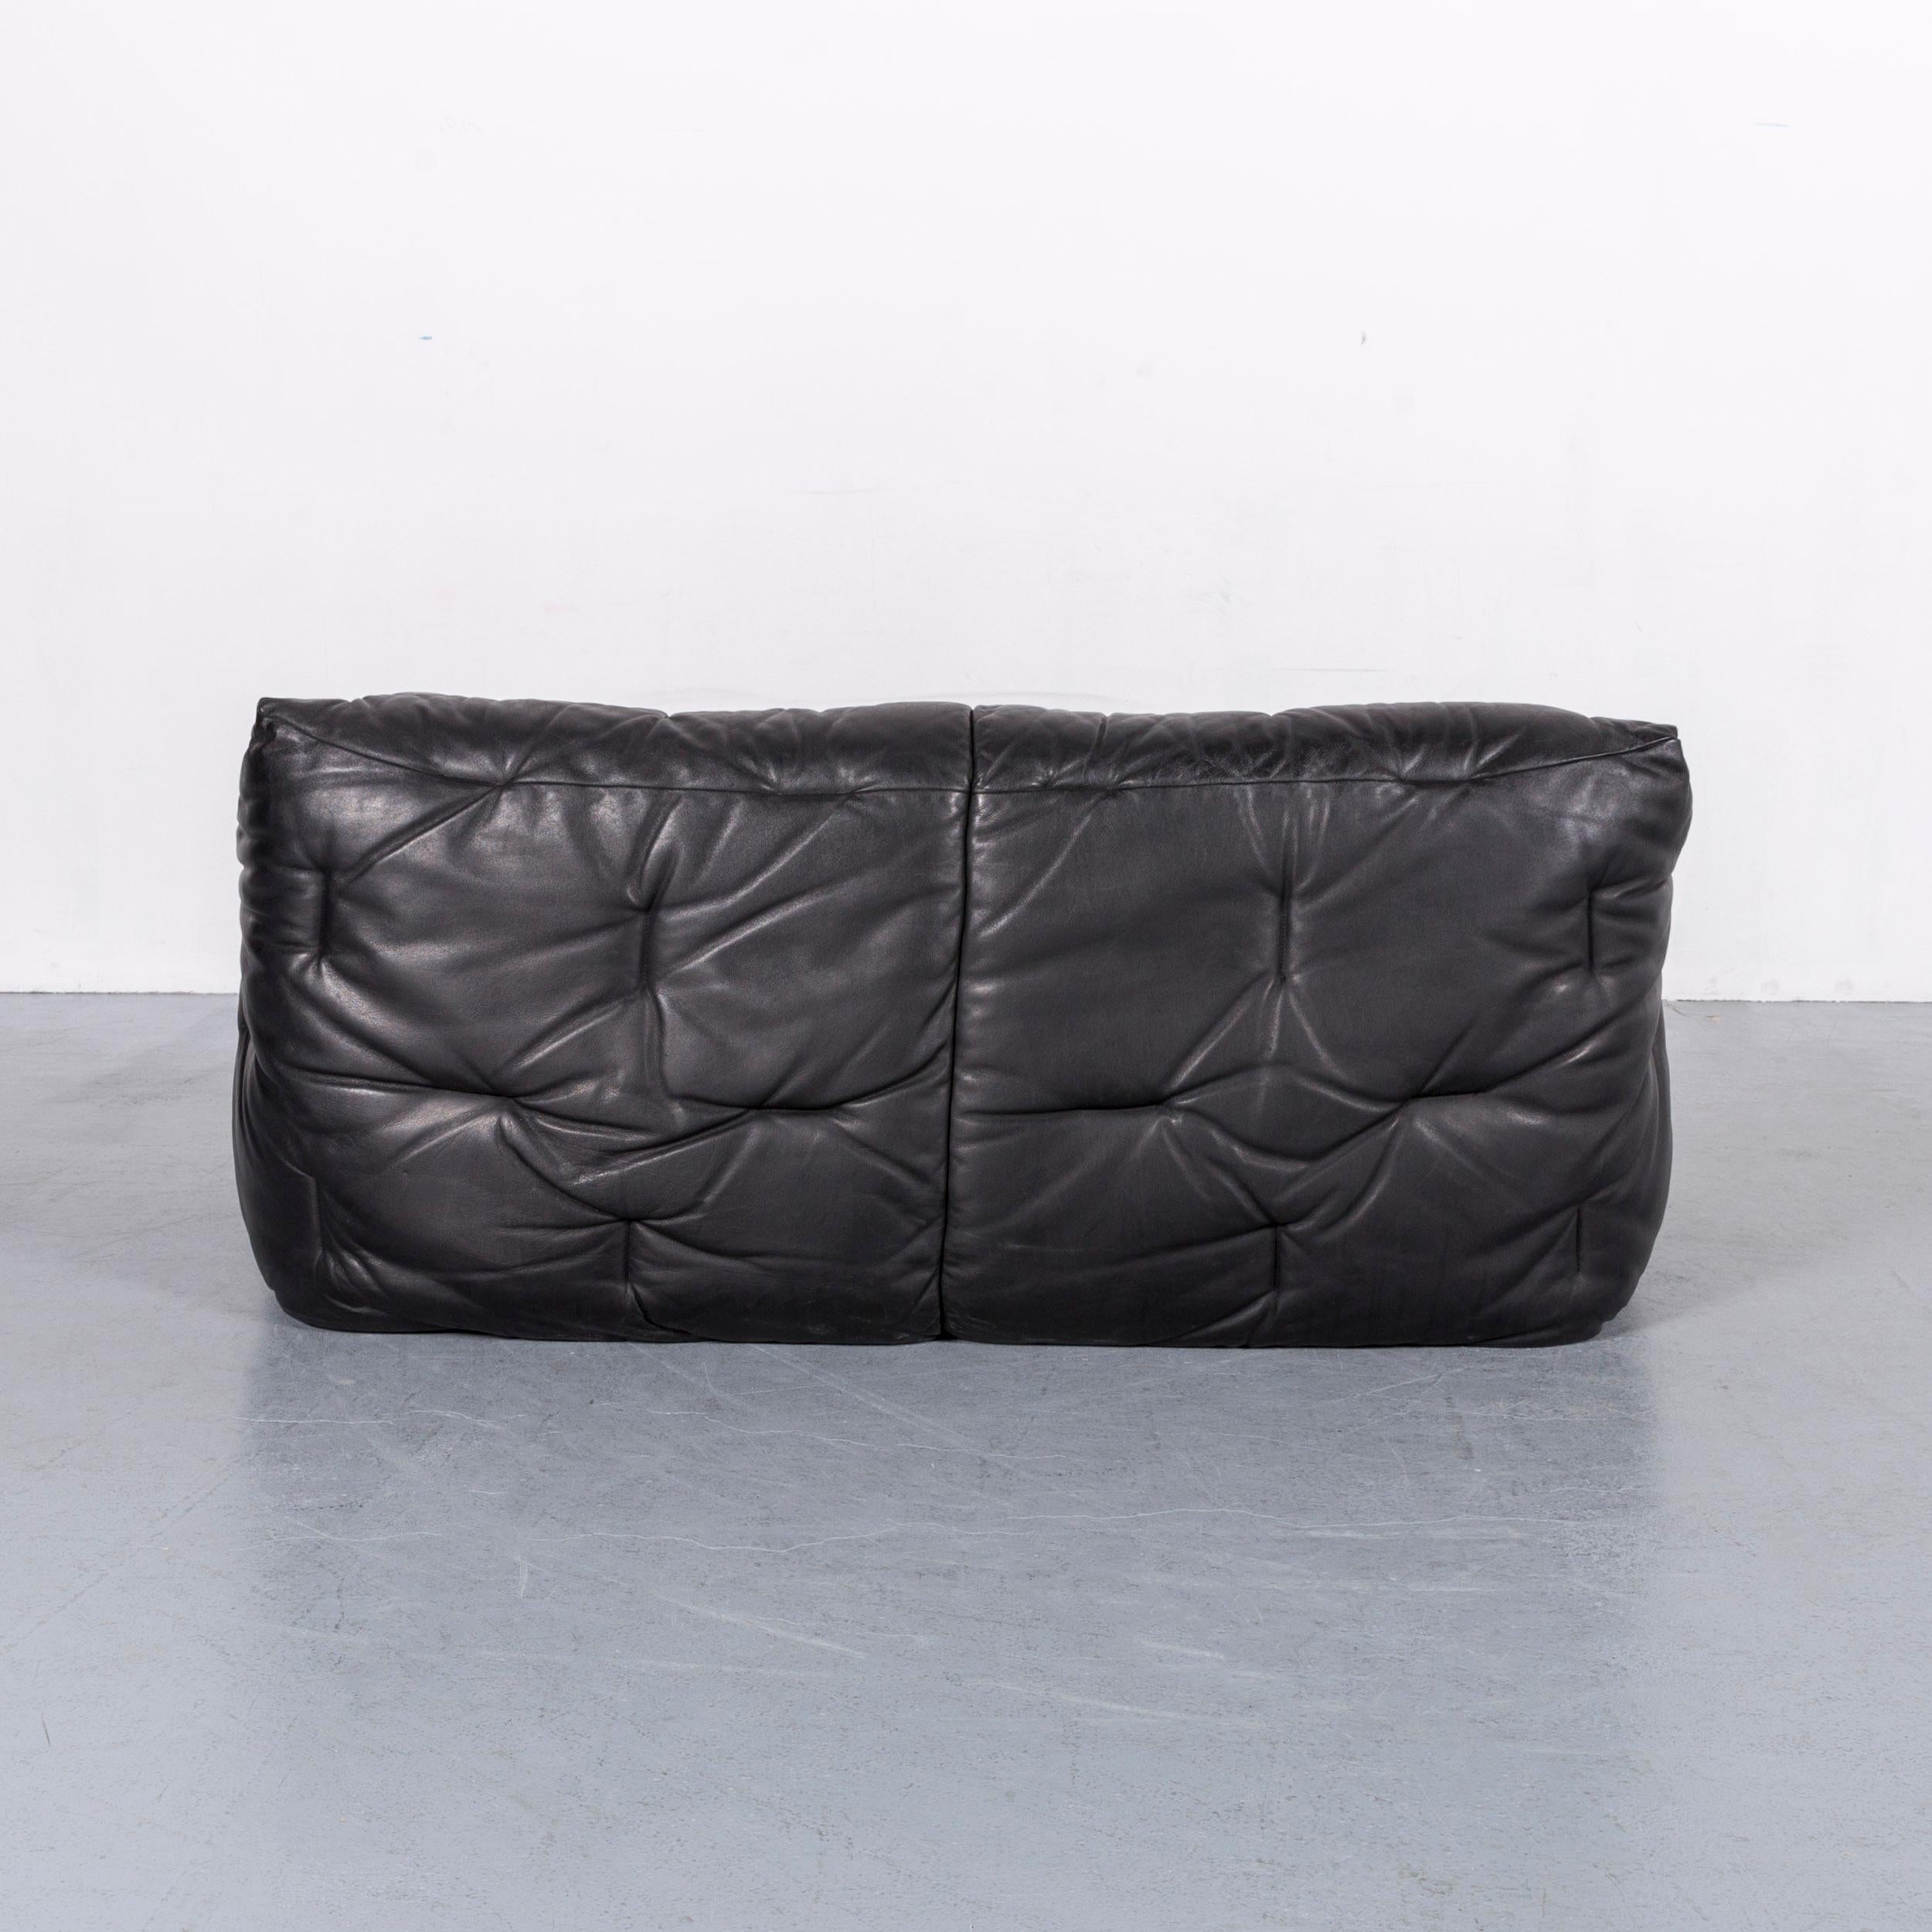 Roche Bobois Informel Leather Sofa Black Two-Seat Couch 1